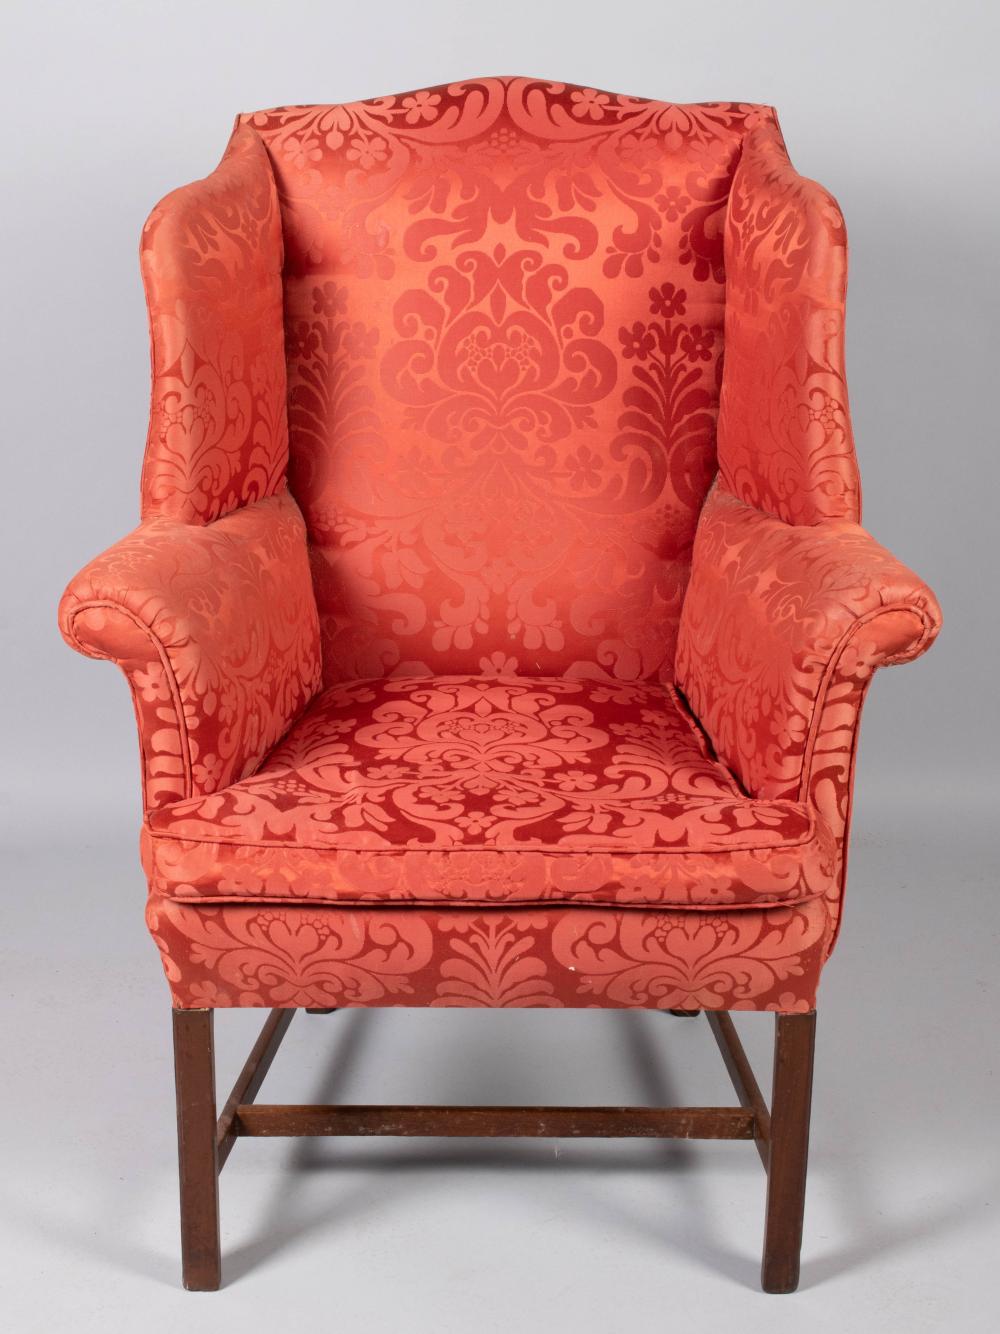 GEORGE III STYLE SMALL WING CHAIR 33d402